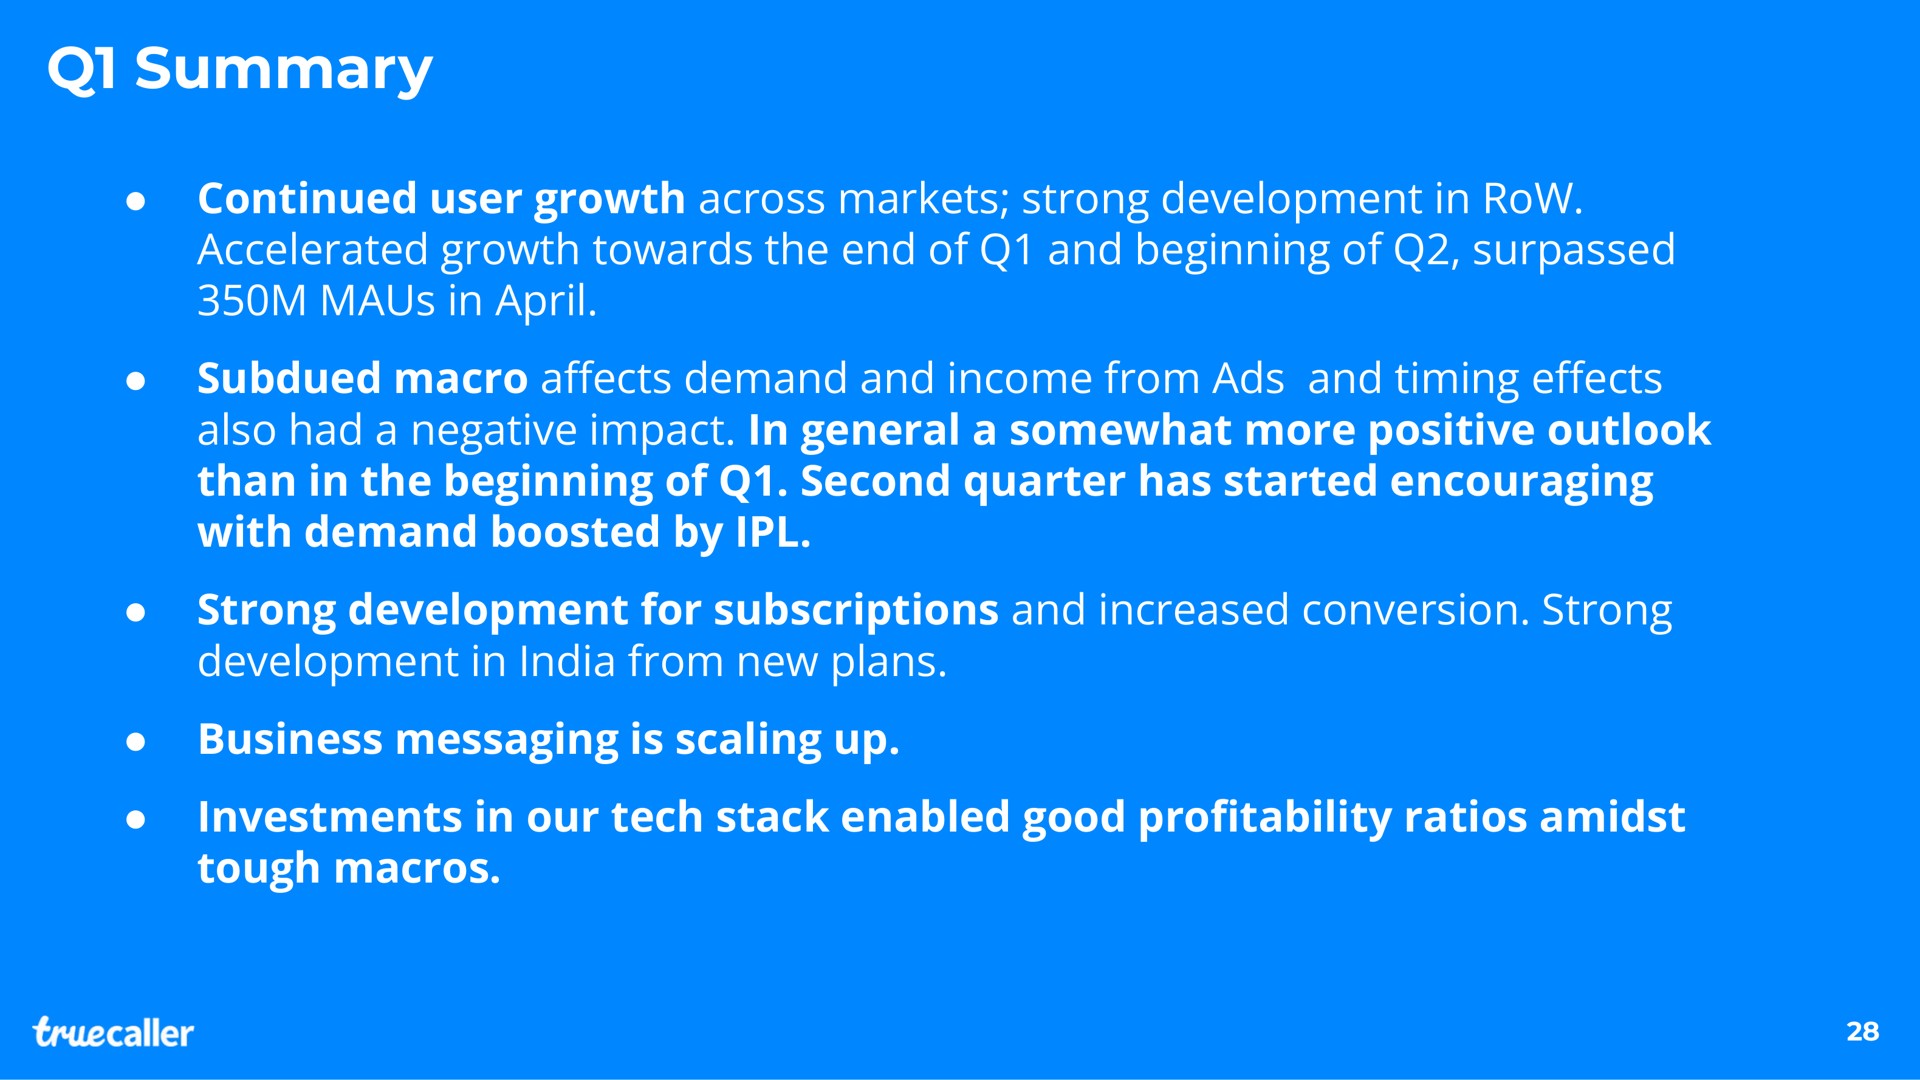 summary continued user growth across markets strong development in row accelerated growth towards the end of and beginning of surpassed in subdued macro a demand and income from ads and timing also had a negative impact in general a somewhat more positive outlook than in the beginning of second quarter has started encouraging with demand boosted by strong development for subscriptions and increased conversion strong development in from new plans business messaging is scaling up investments in our tech stack enabled good pro ratios amidst tough macros affects effects profitability | Truecaller